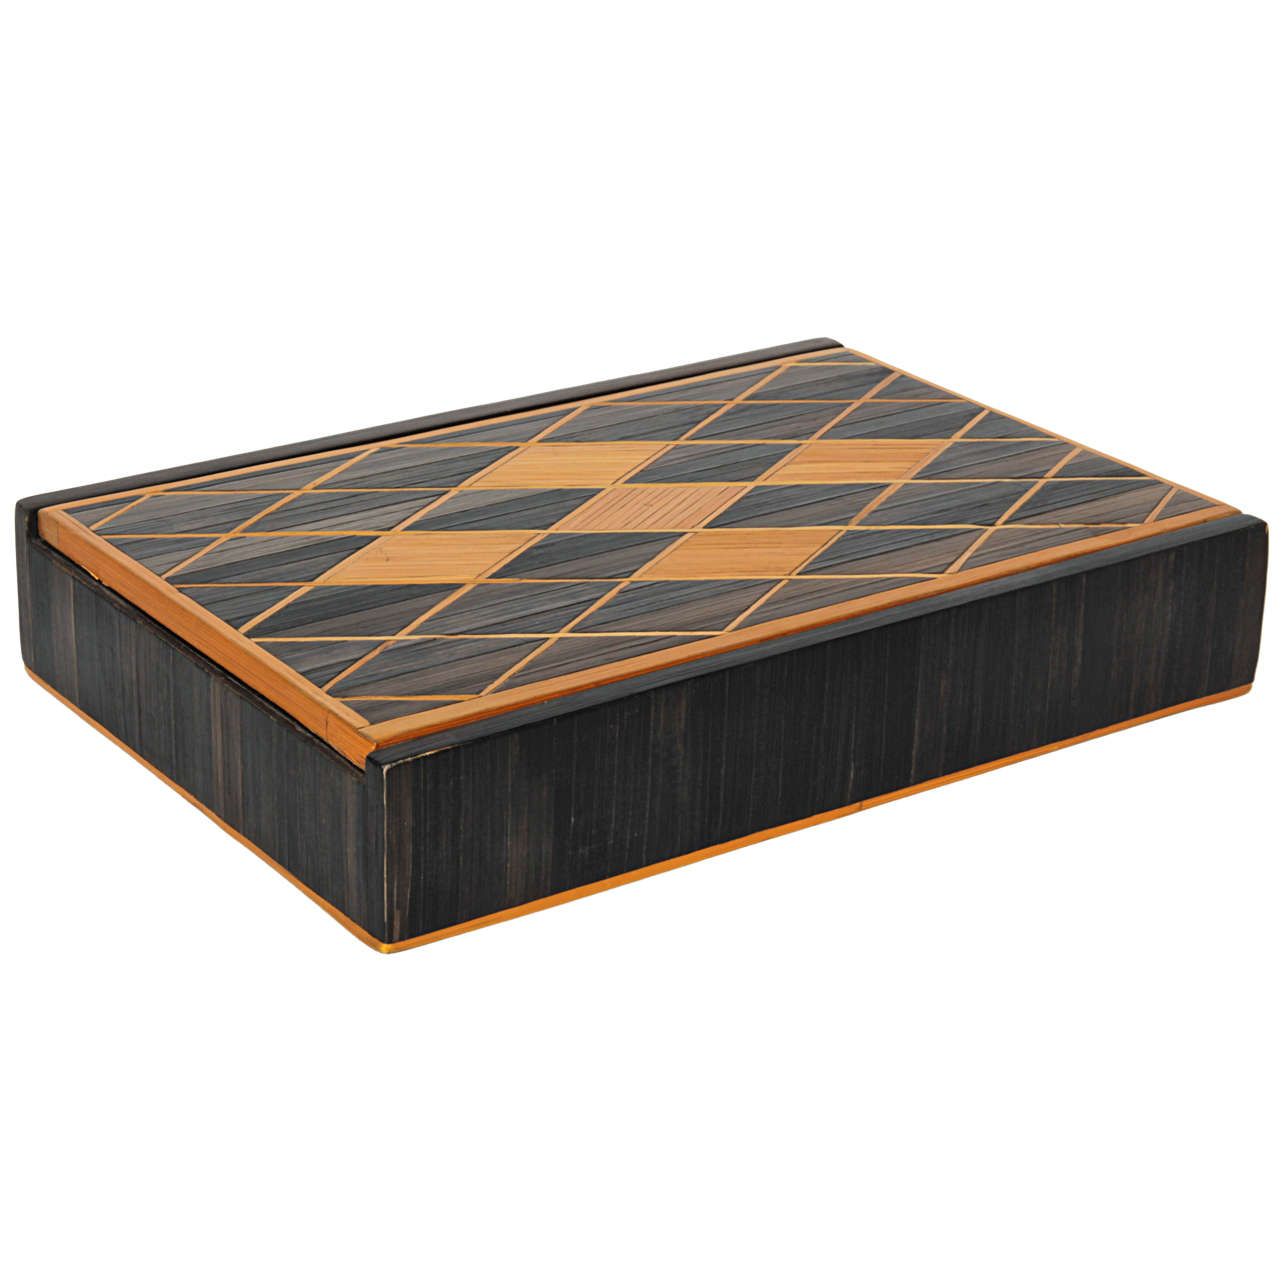 Andre Arbus (attr.) French Art Deco Straw Marquetry Box c. 1940 For Sale